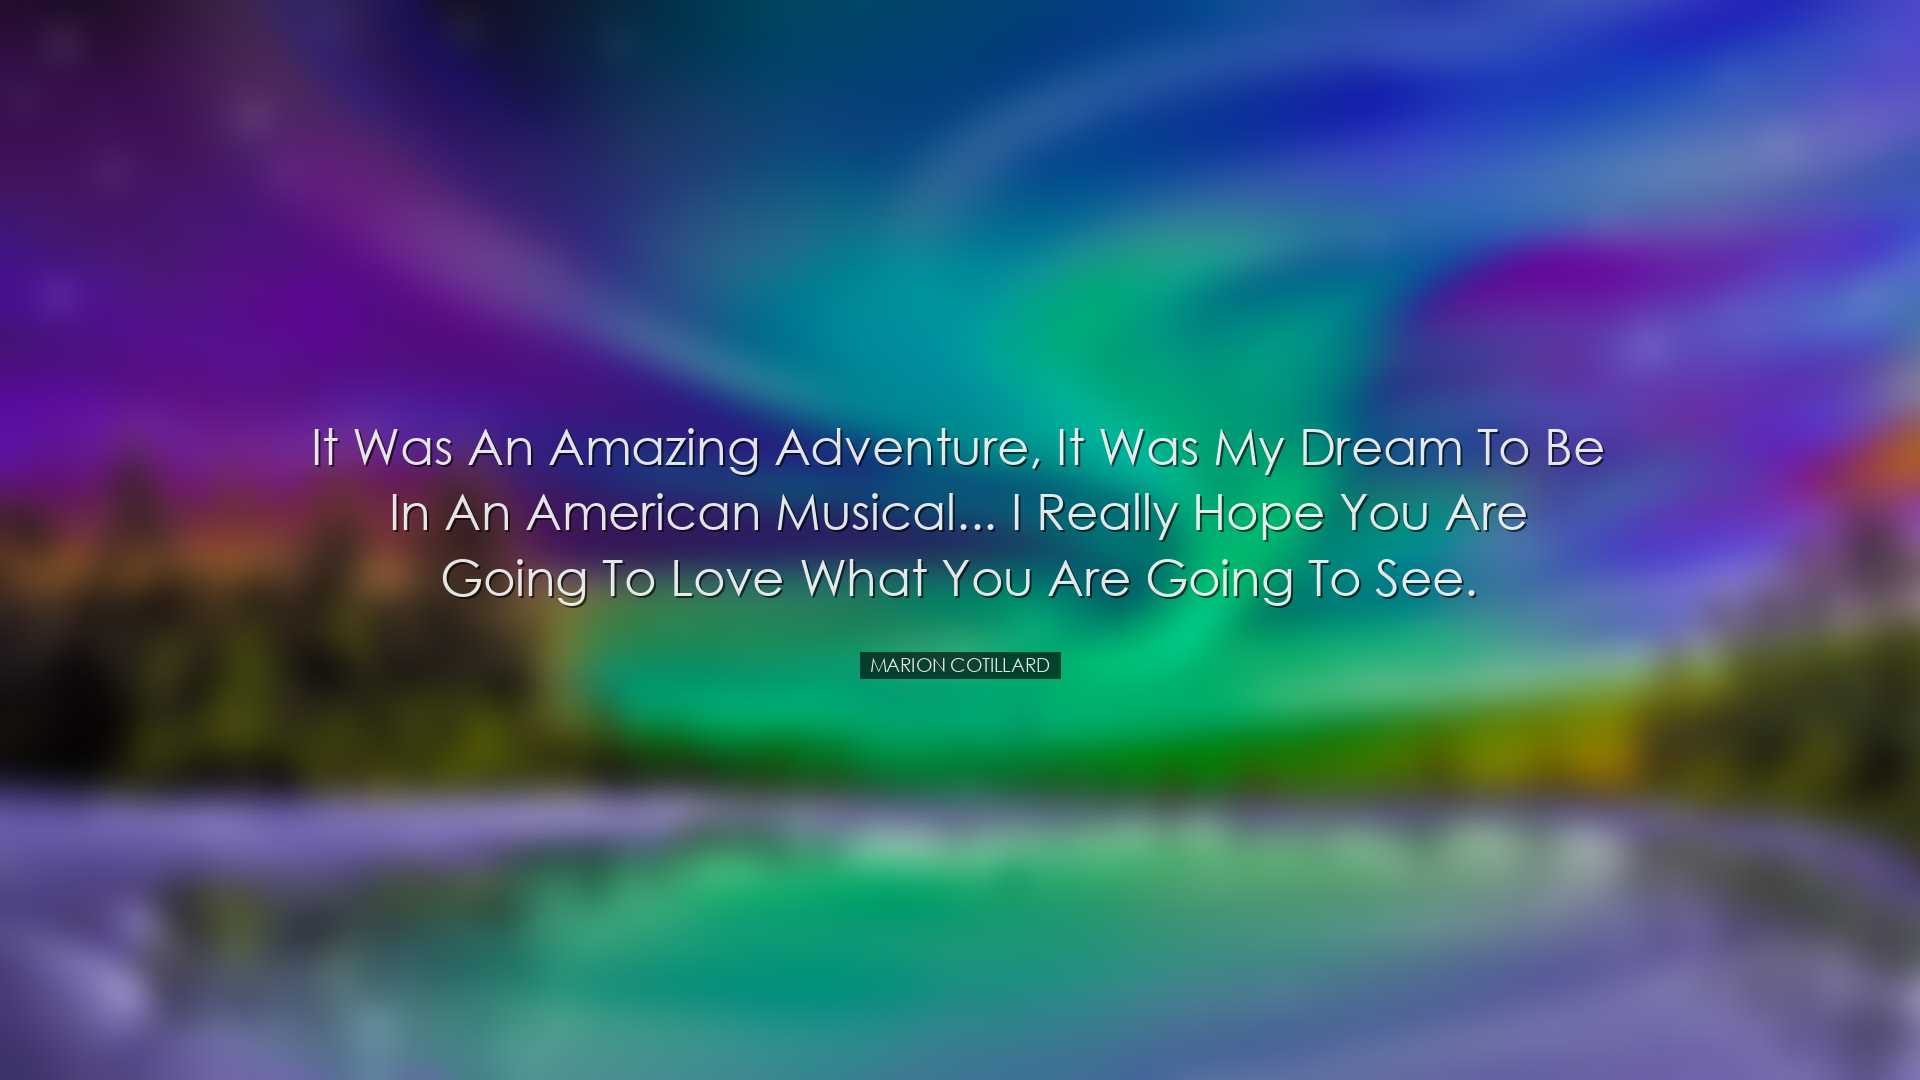 It was an amazing adventure, it was my dream to be in an American